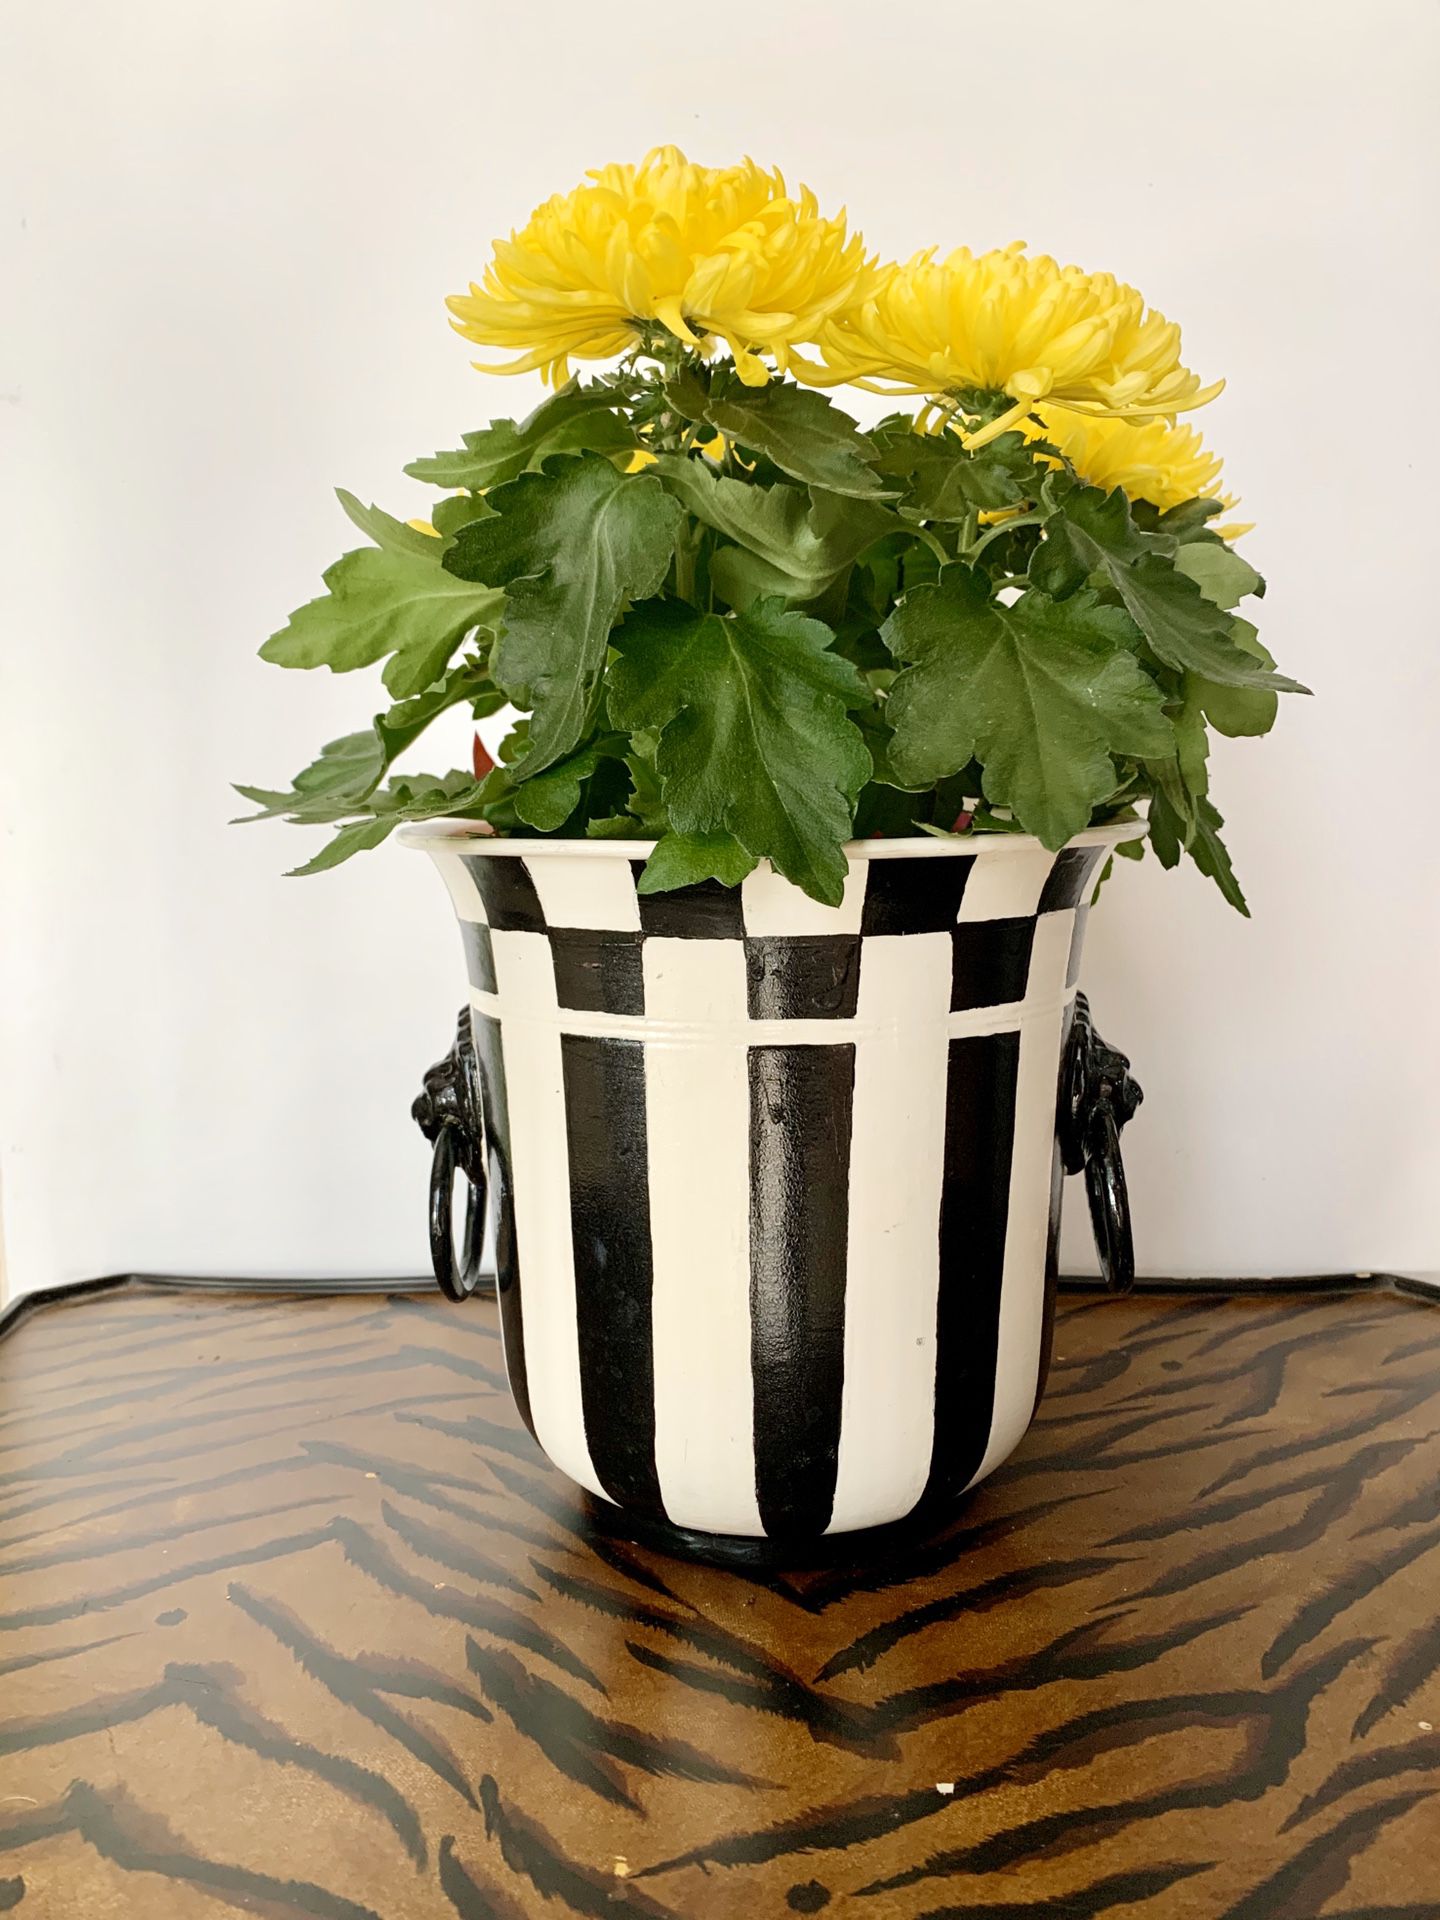 Courtly check black white striped hand painted metal planter bucket container lion handle rings art home decor